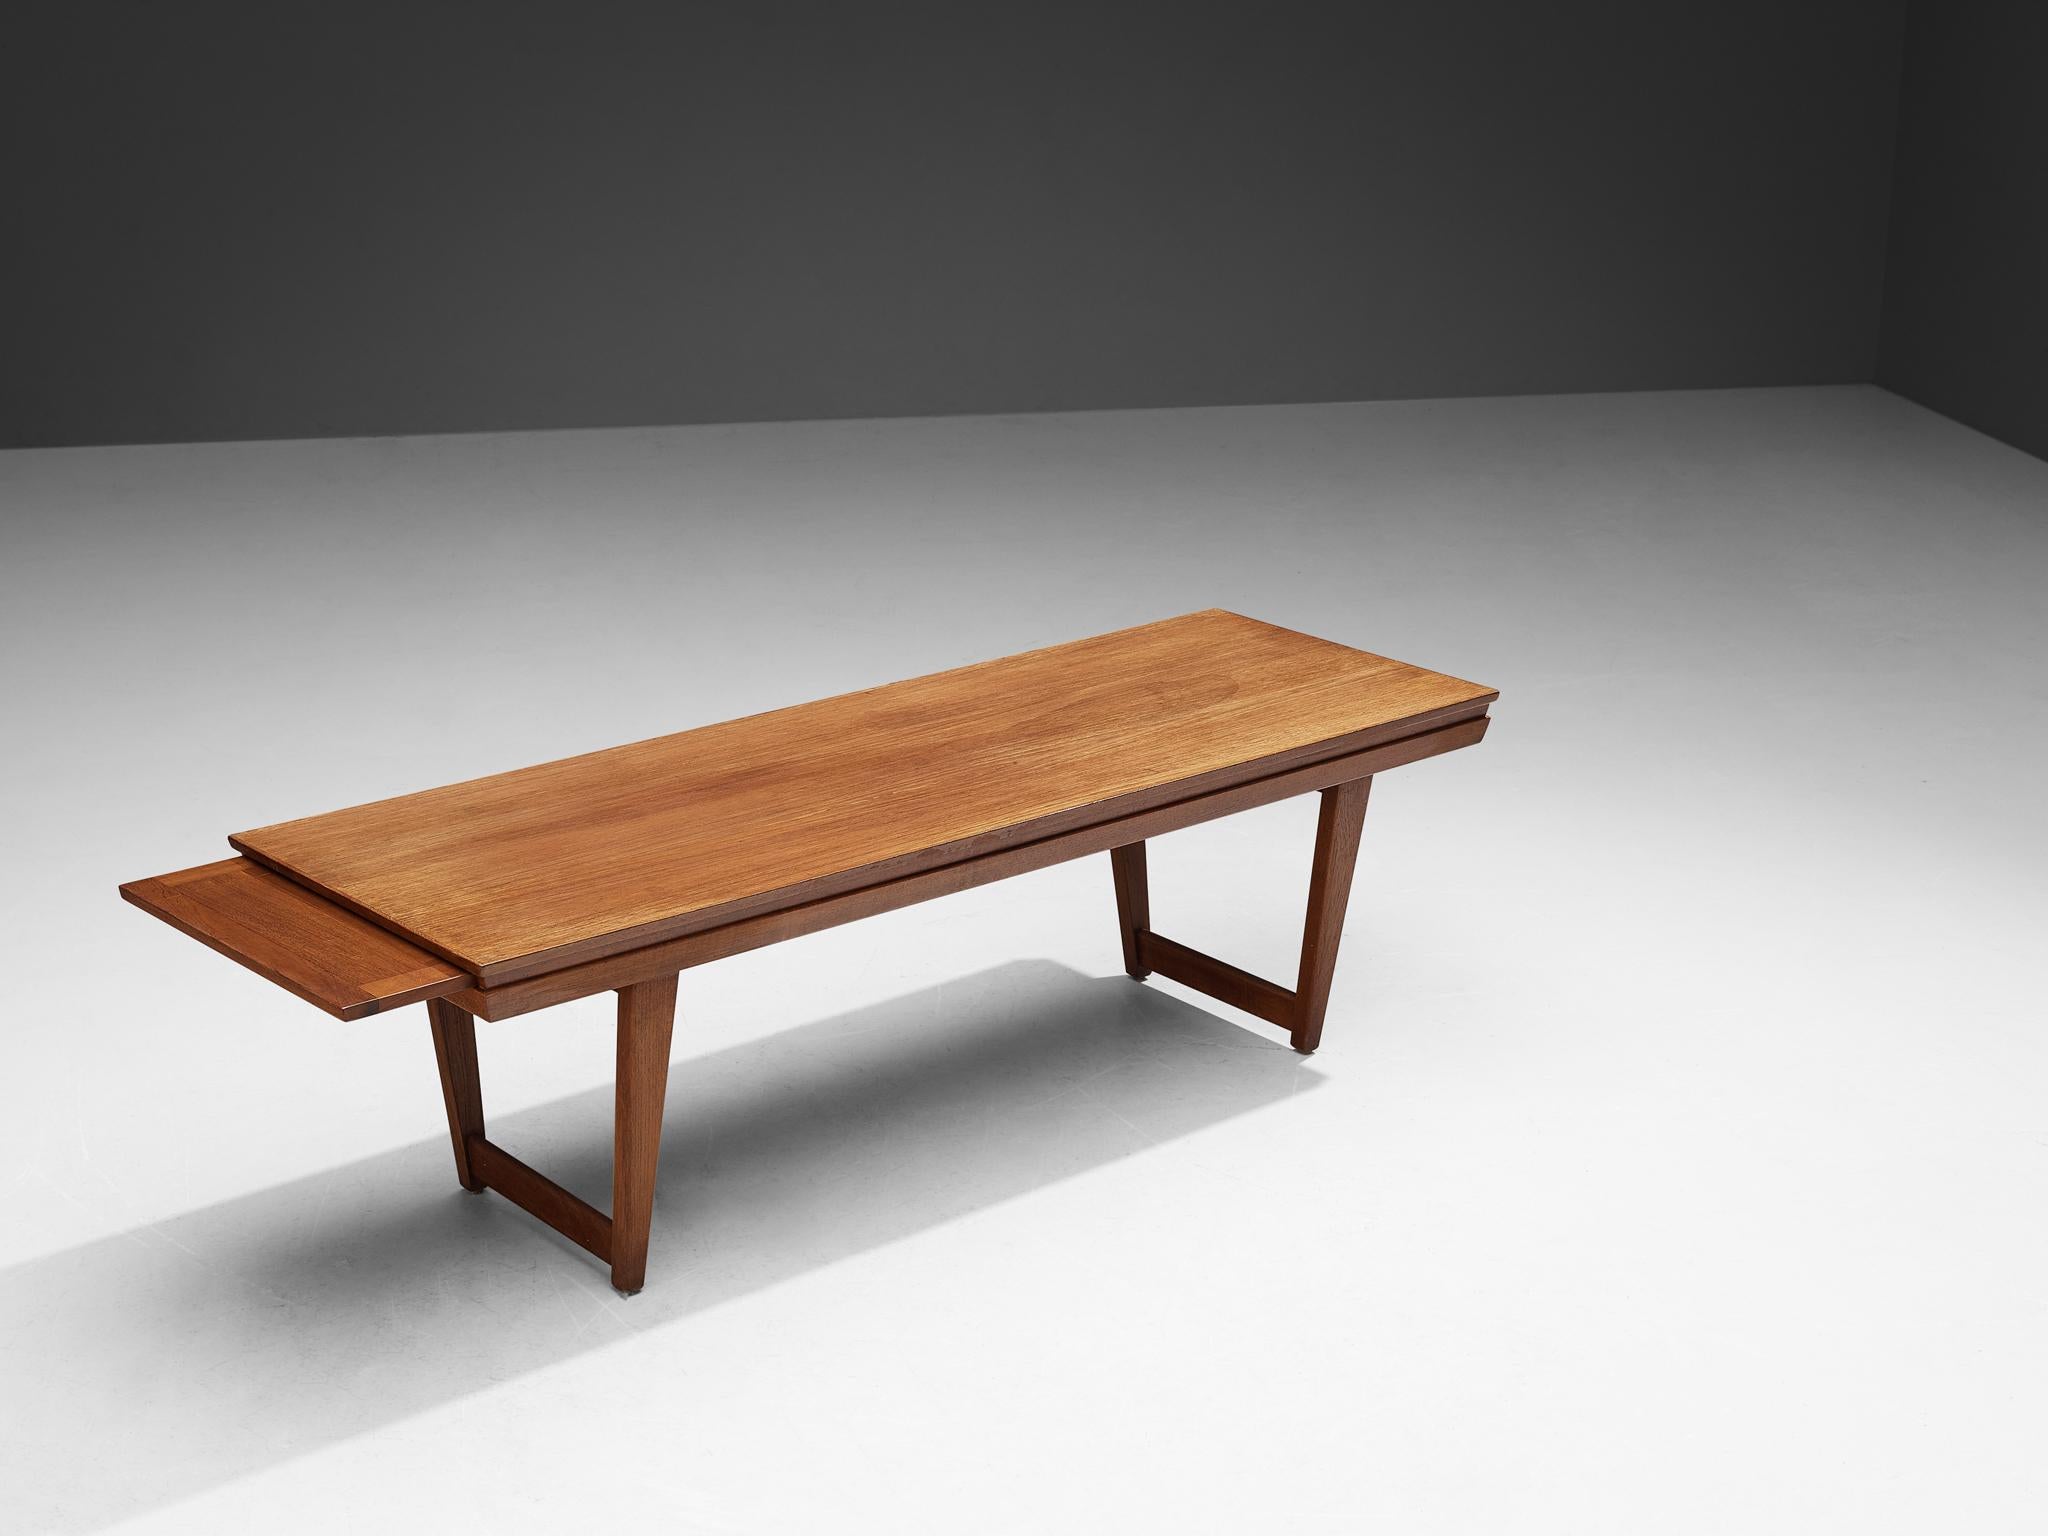 Coffee table, teak, Denmark, 1960s.

Large Danish extendable coffee table executed in solid teak. The model shows a long, rectangular top with vivid wood grain. On both ends, this table contains an extra table leaf to the extend the width even